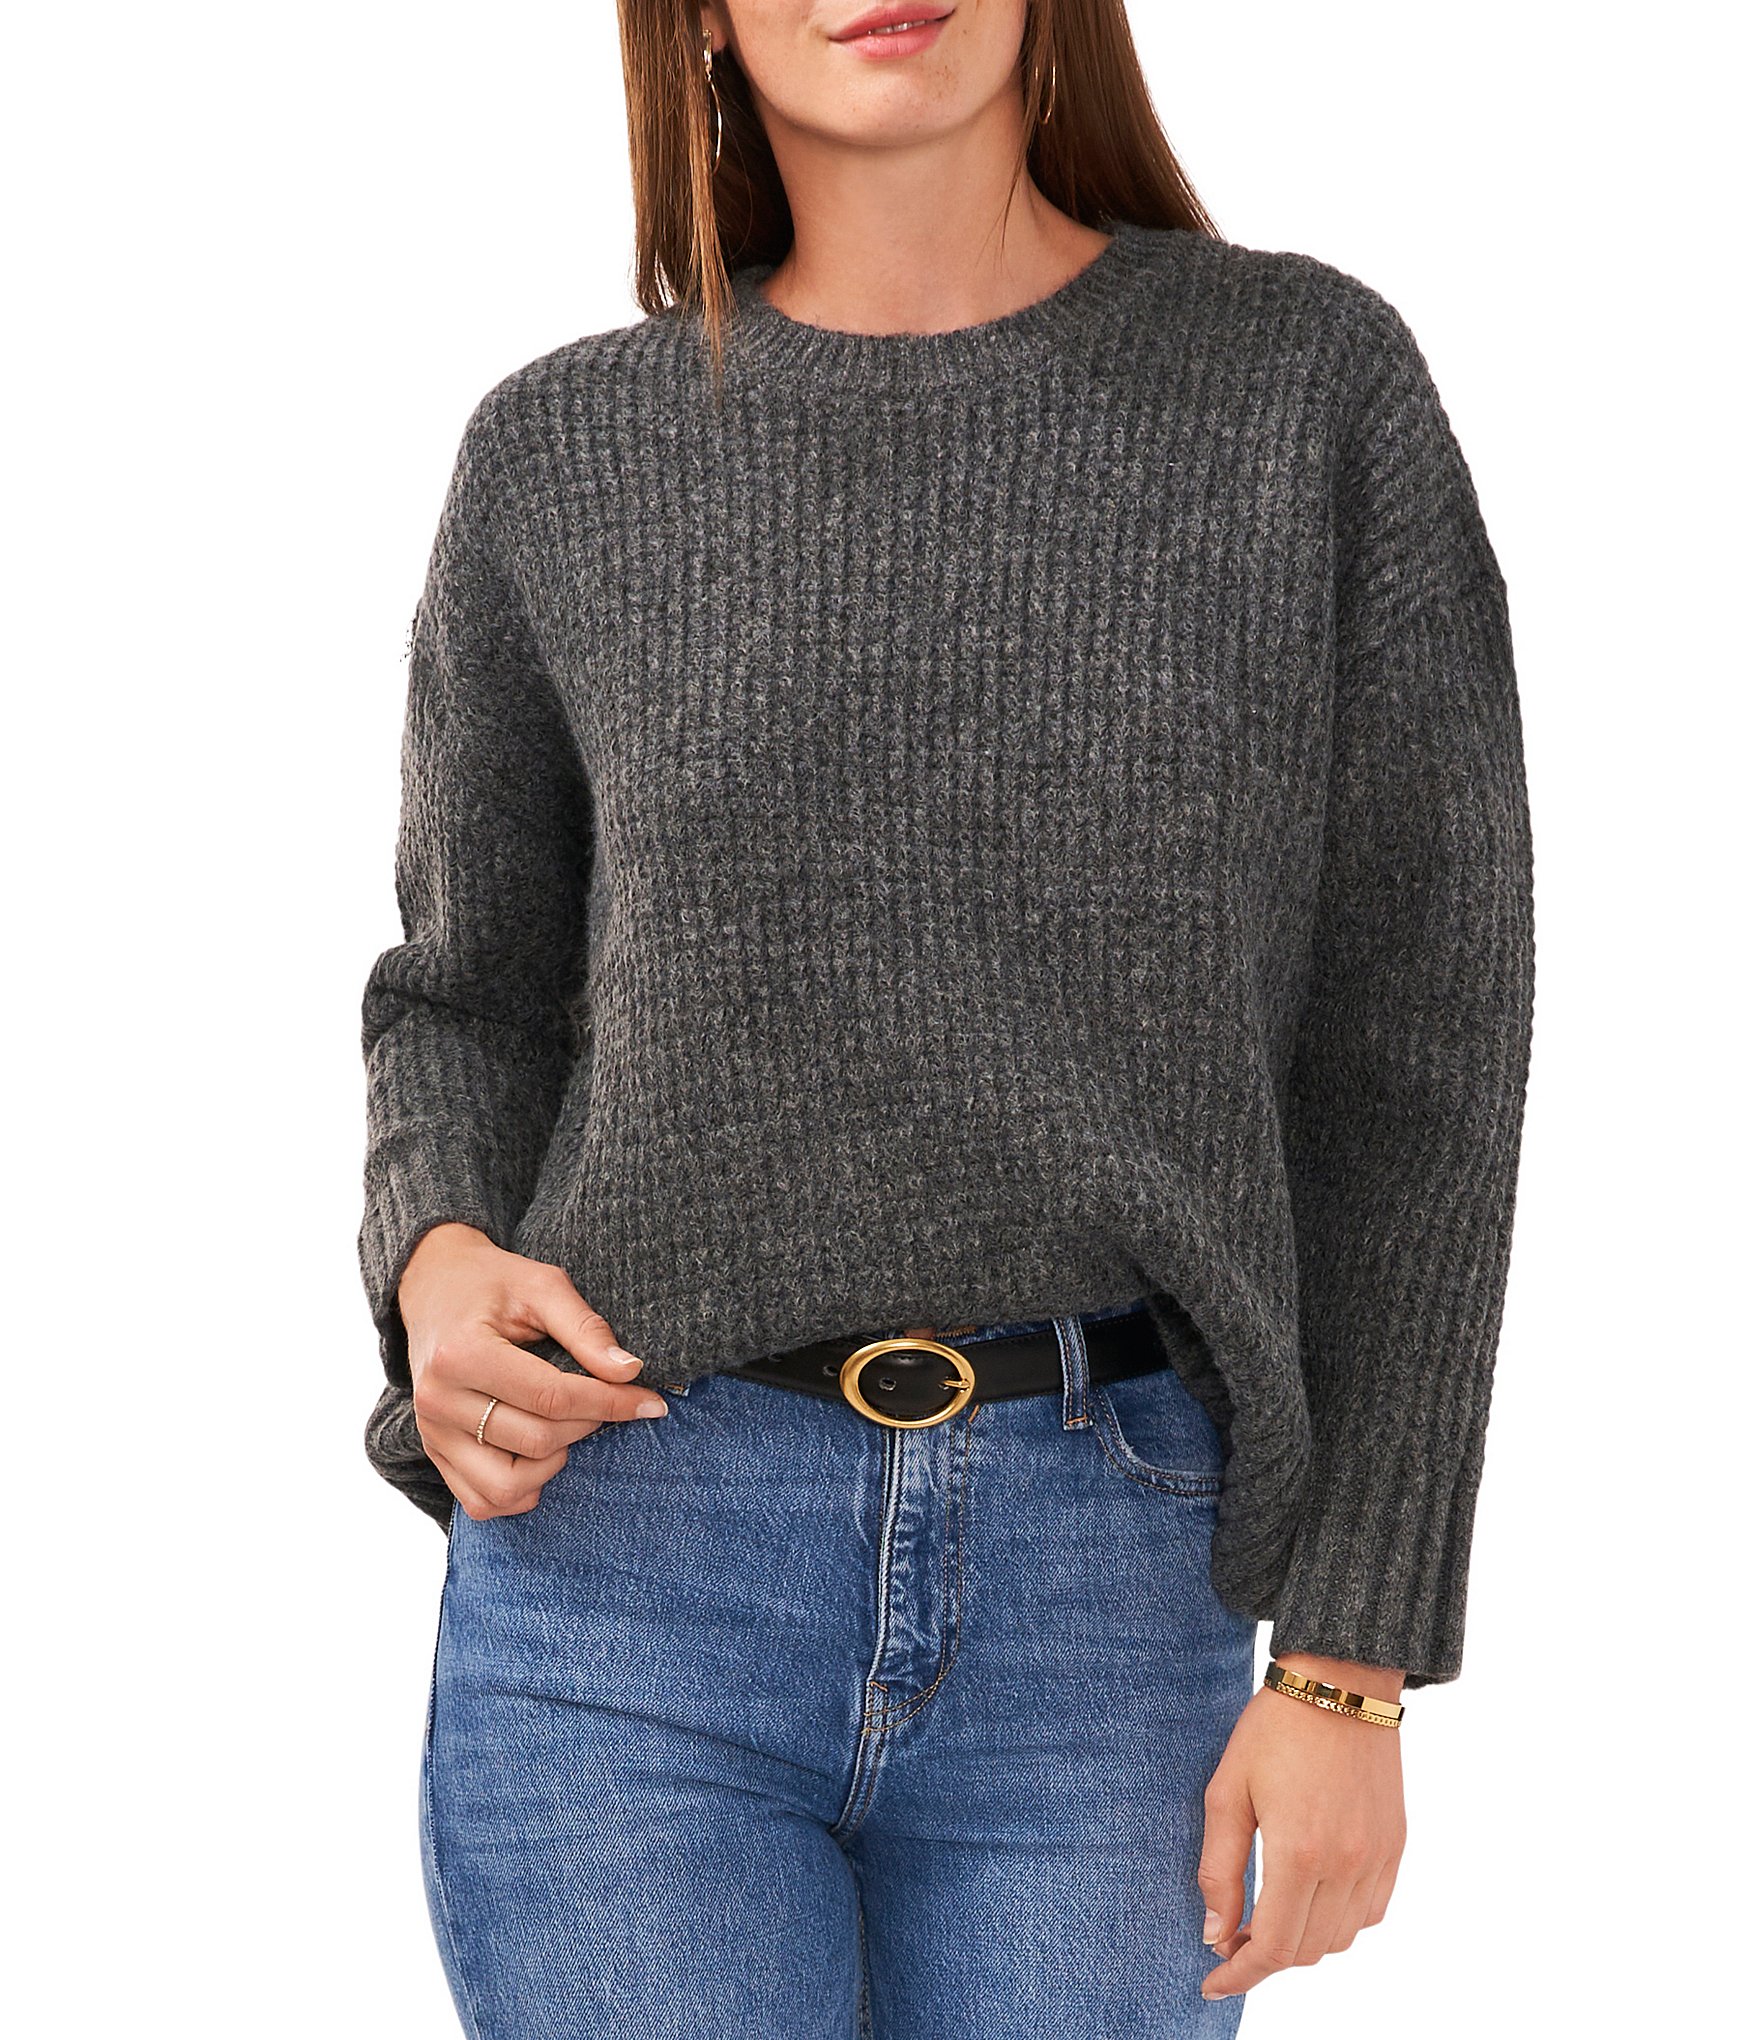 Vince Camuto Waffle Knit Crew Neck Long Sleeve Sweater